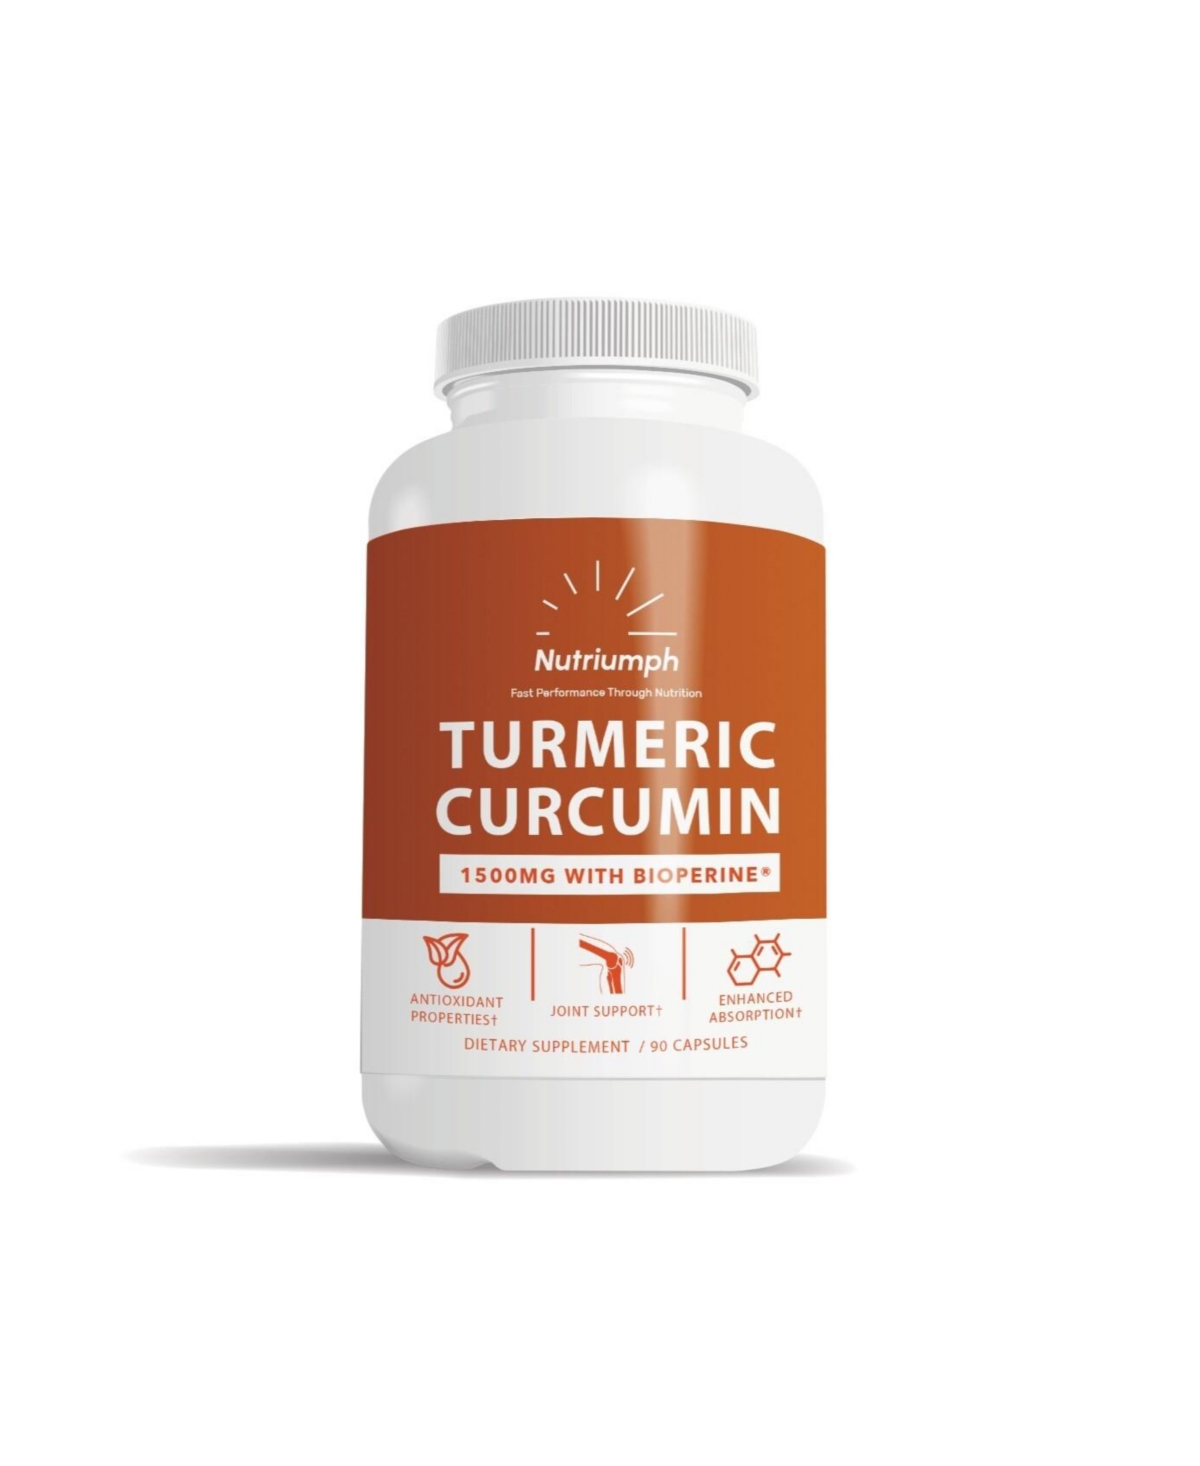 Turmeric Curcumin w/ Bioperine for better absorption - Joint Support & Potent Antioxidant Supplement, Healthy Inflammatory Support High Pote